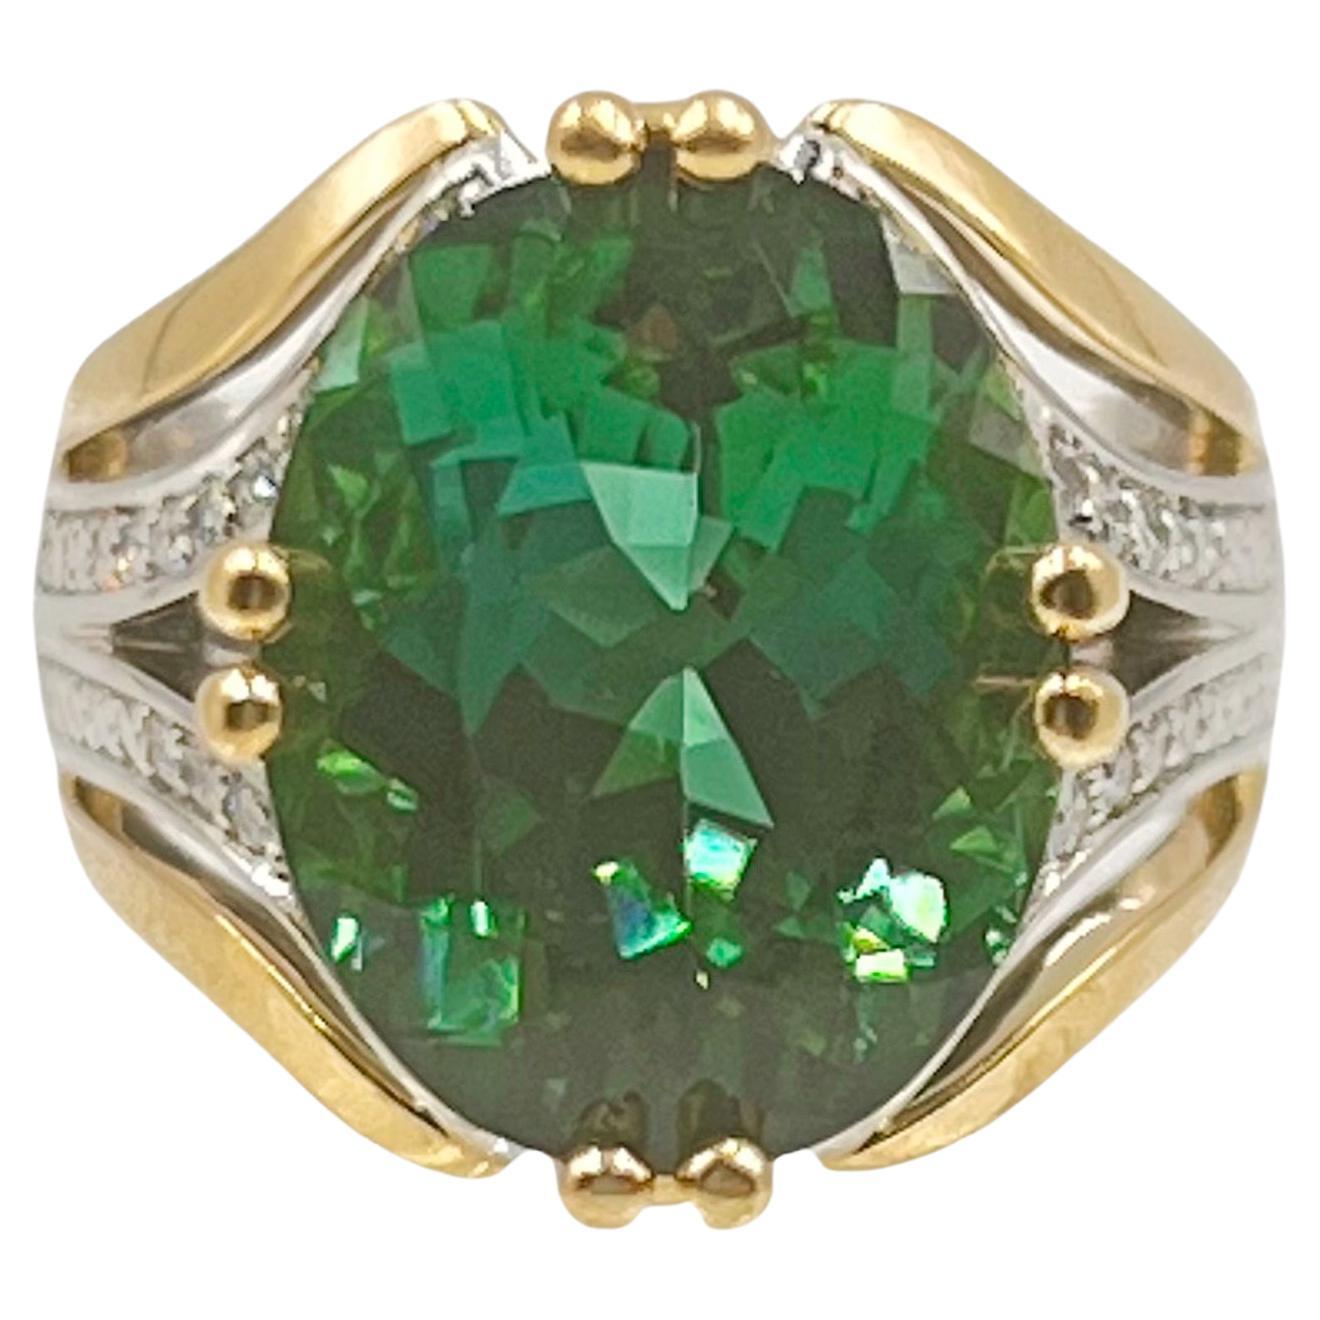 Green tourmaline ring by designer Coffin & Trout in platinum and 18k yellow gold.  Exquisite custom mounting set with a vibrant oval faceted green tourmaline weighing 11.12 carats. The top sides of the split design band are accented by forty-eight